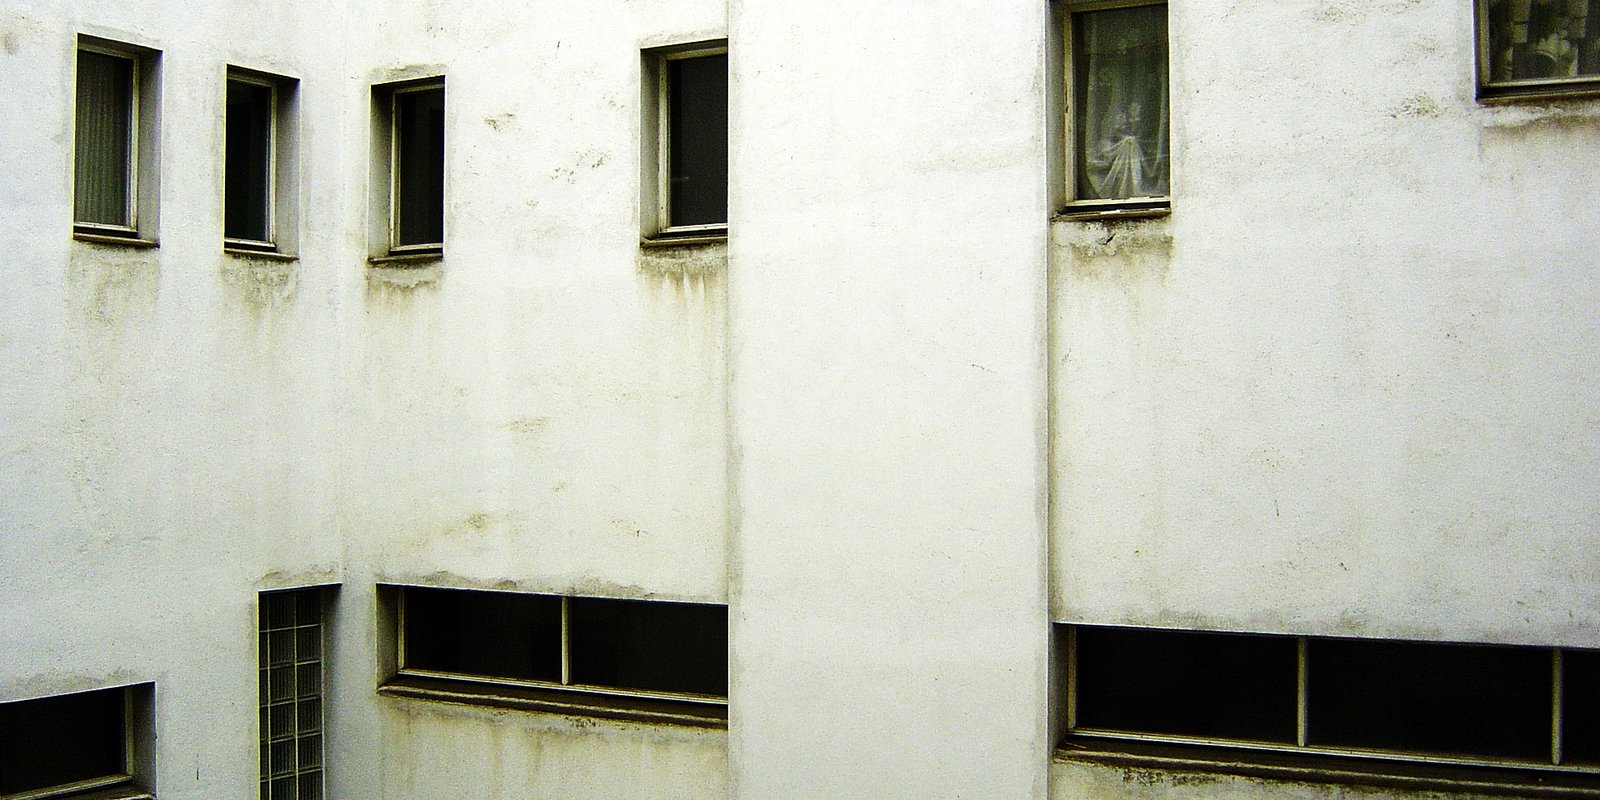 several windows and bars on a white building